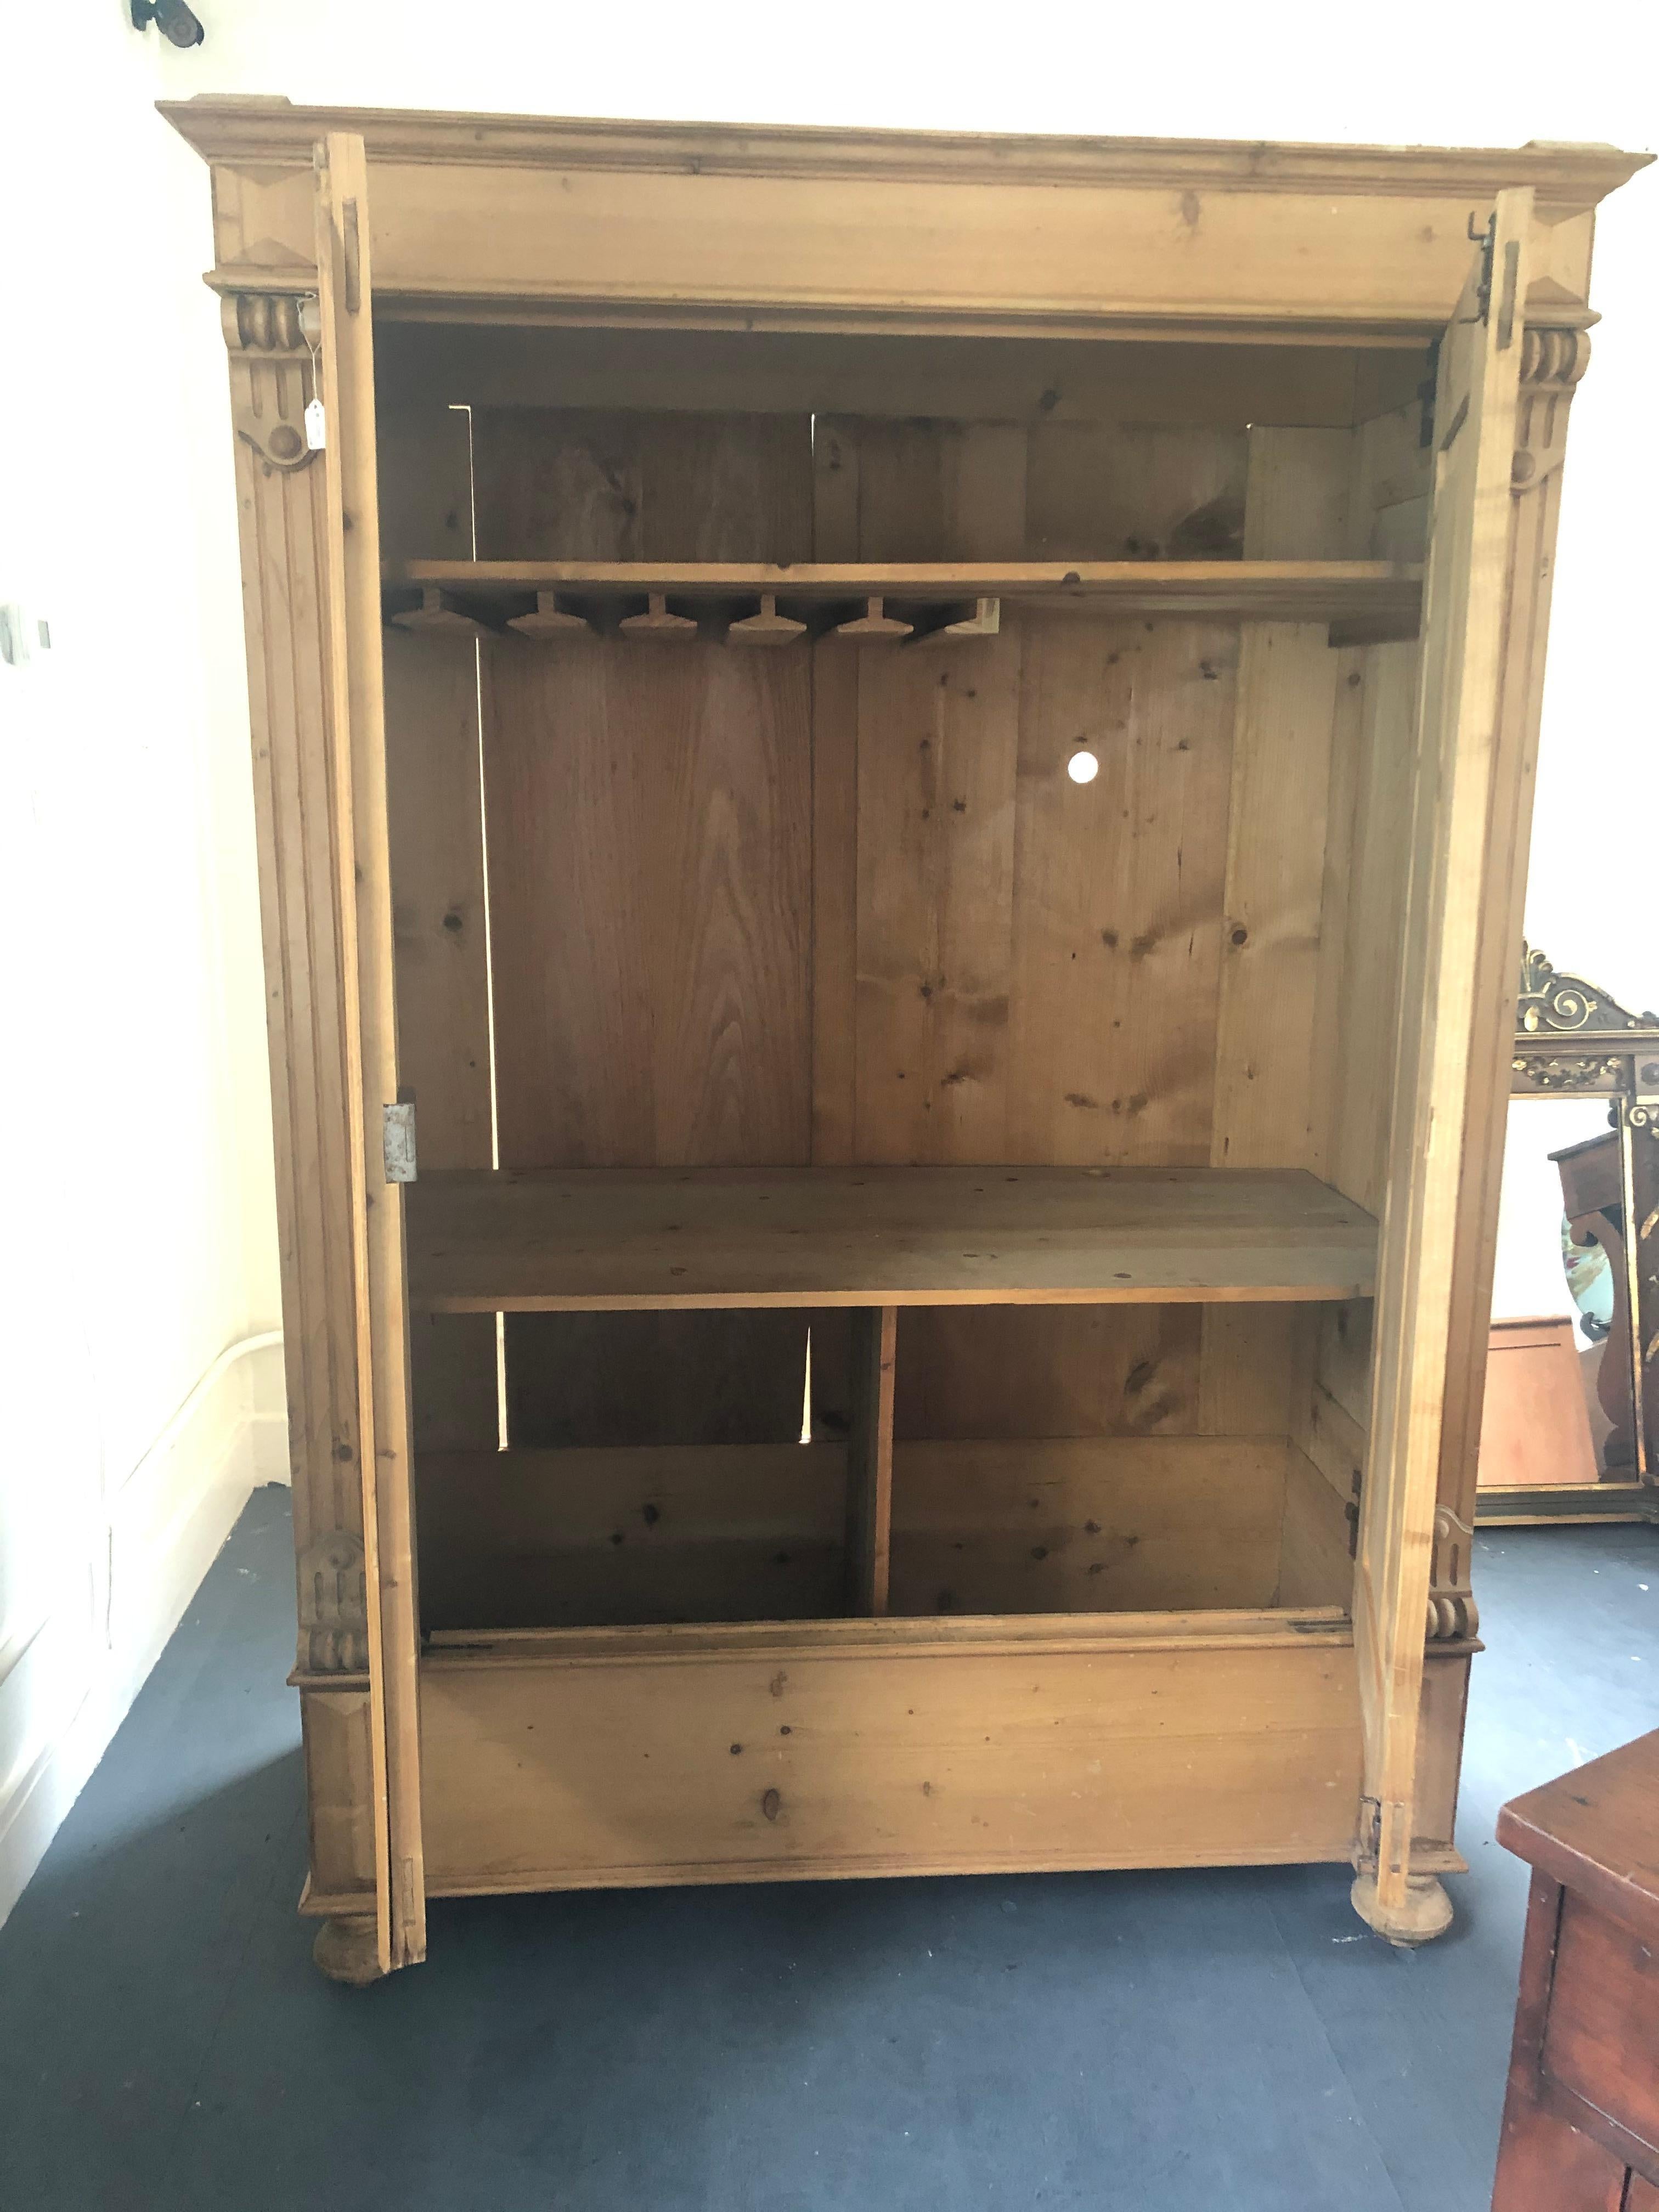 Wonderful and versatile antique German cupboard having natural pine construction and original brass hardware, round ball feet and beautiful carved wood decoration. Former owner outfitted the interior with wine glass rack so would make a fabulous dry